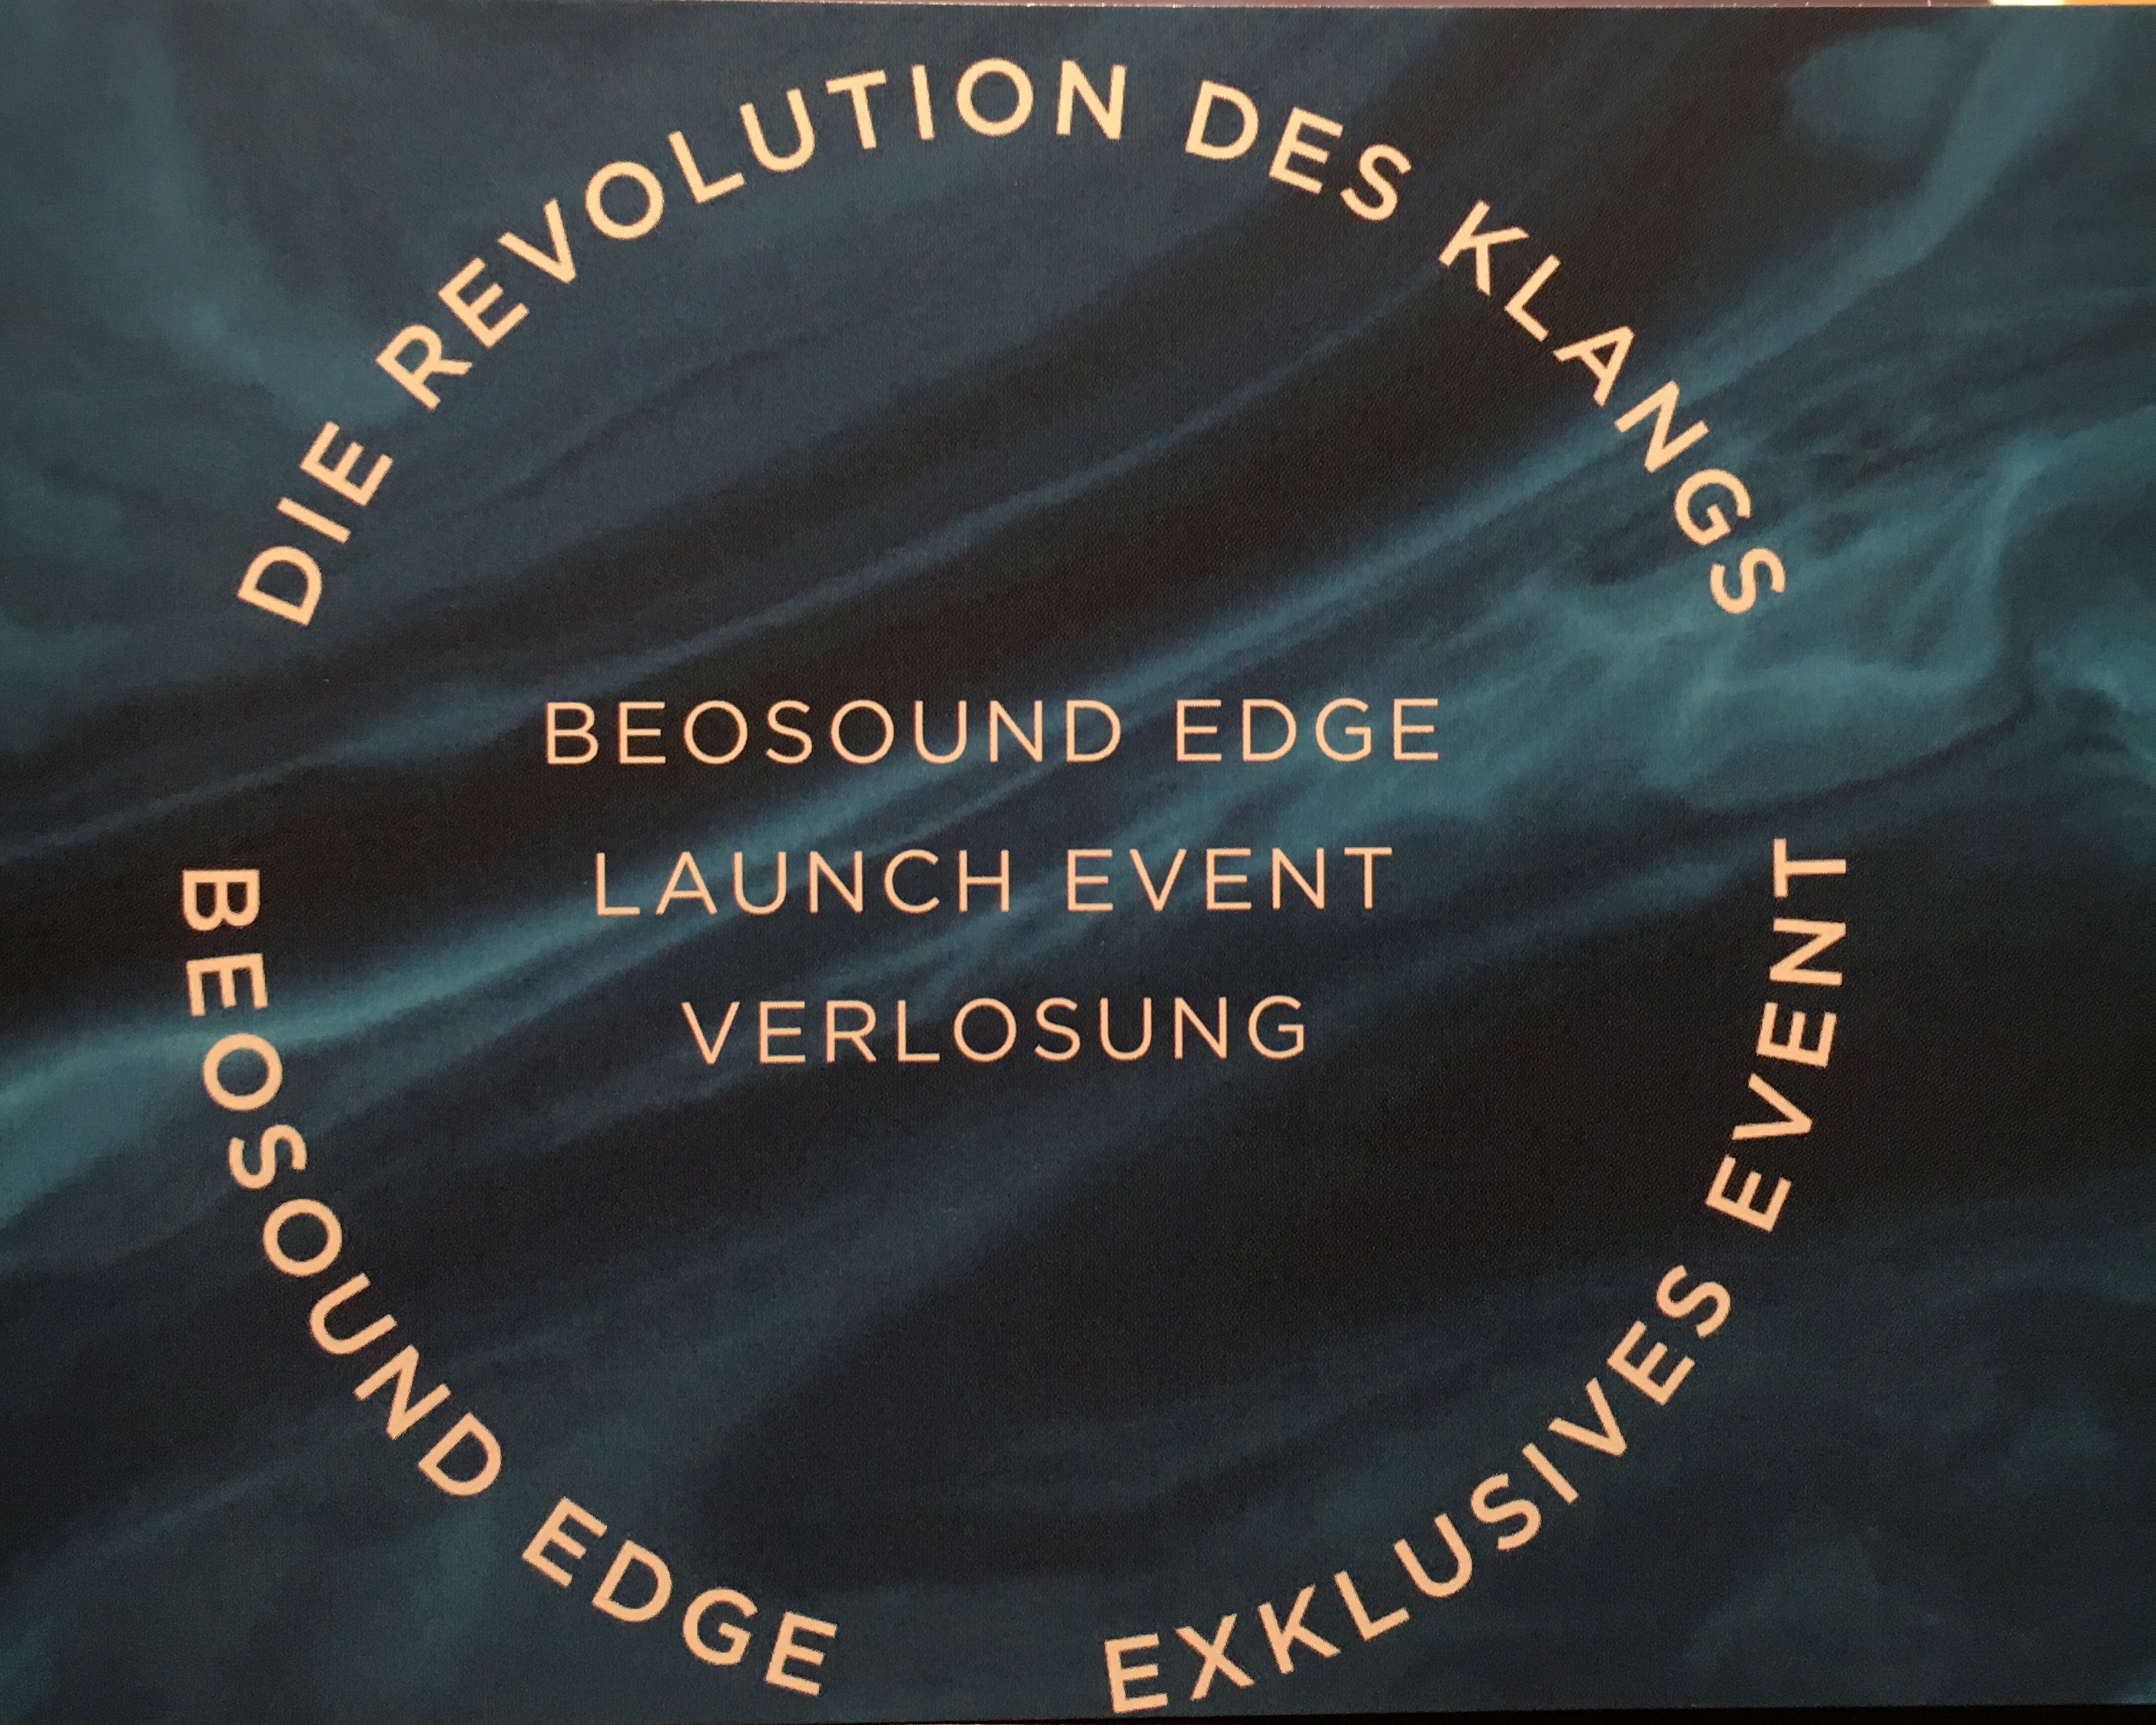 BEOSOUND EDGE EXKLUSIVES EVENT 30.11.2018 Hannover